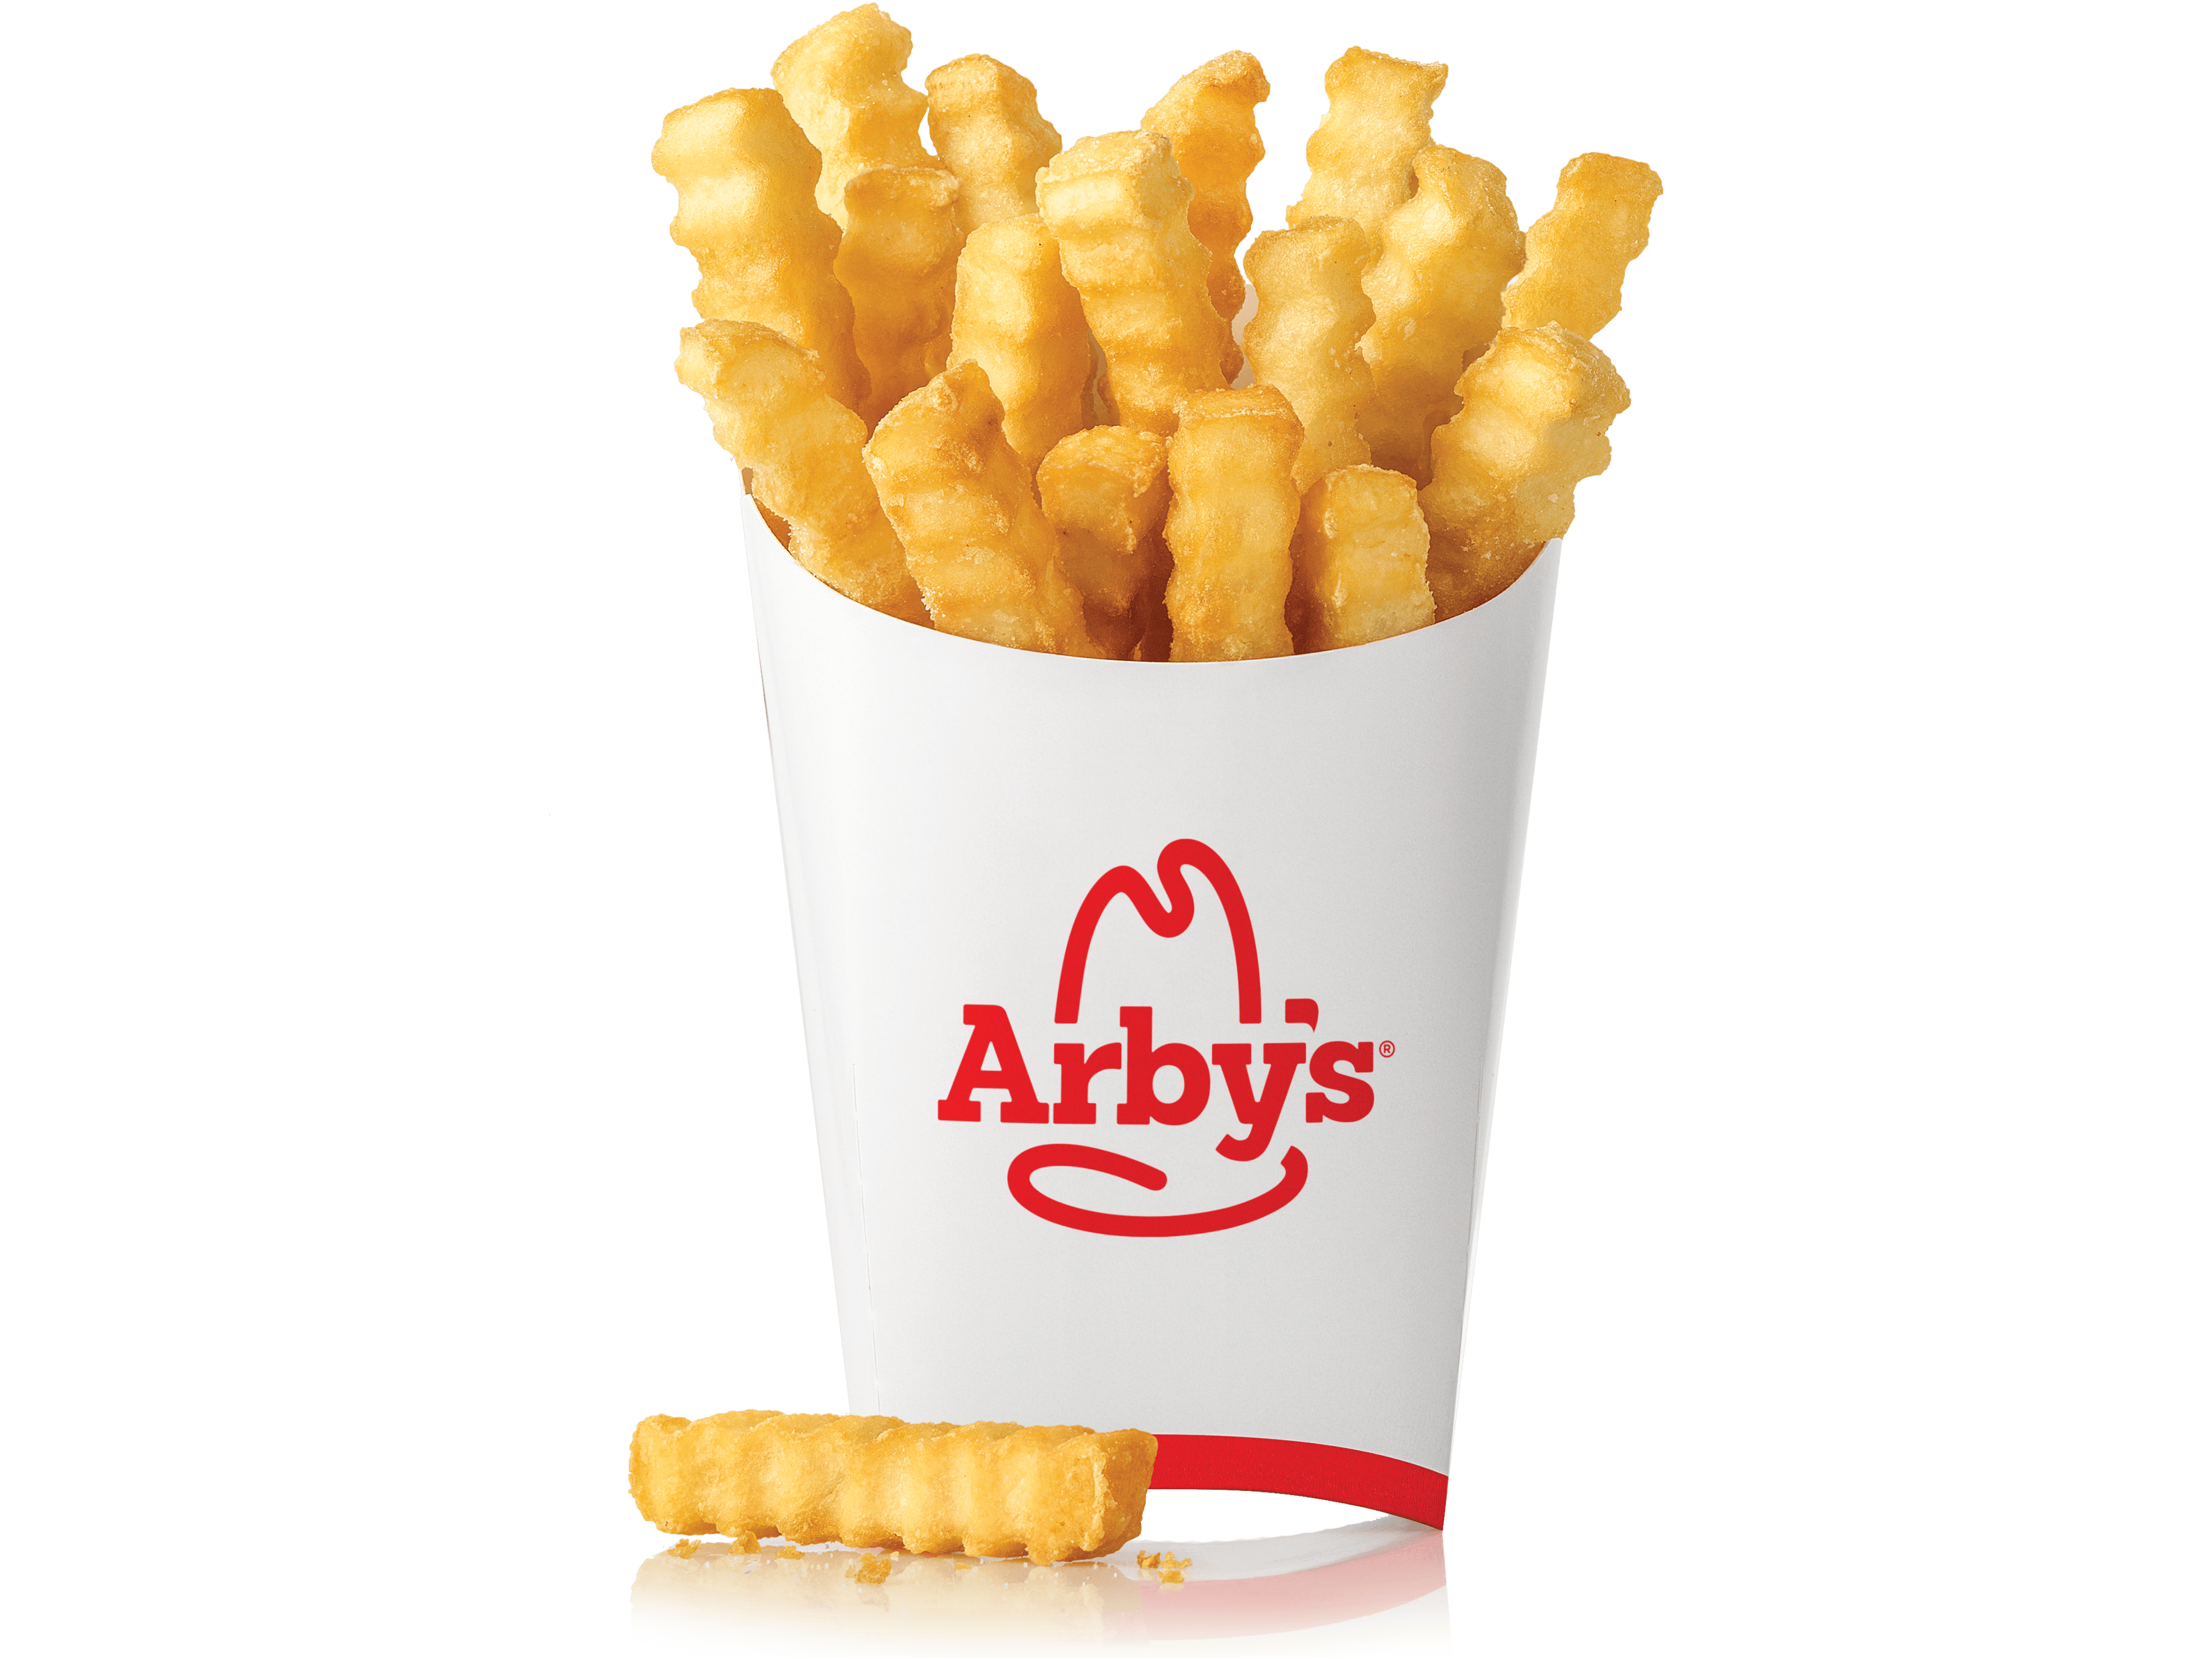 Arby's Large Crinkle Fries Nutrition Facts